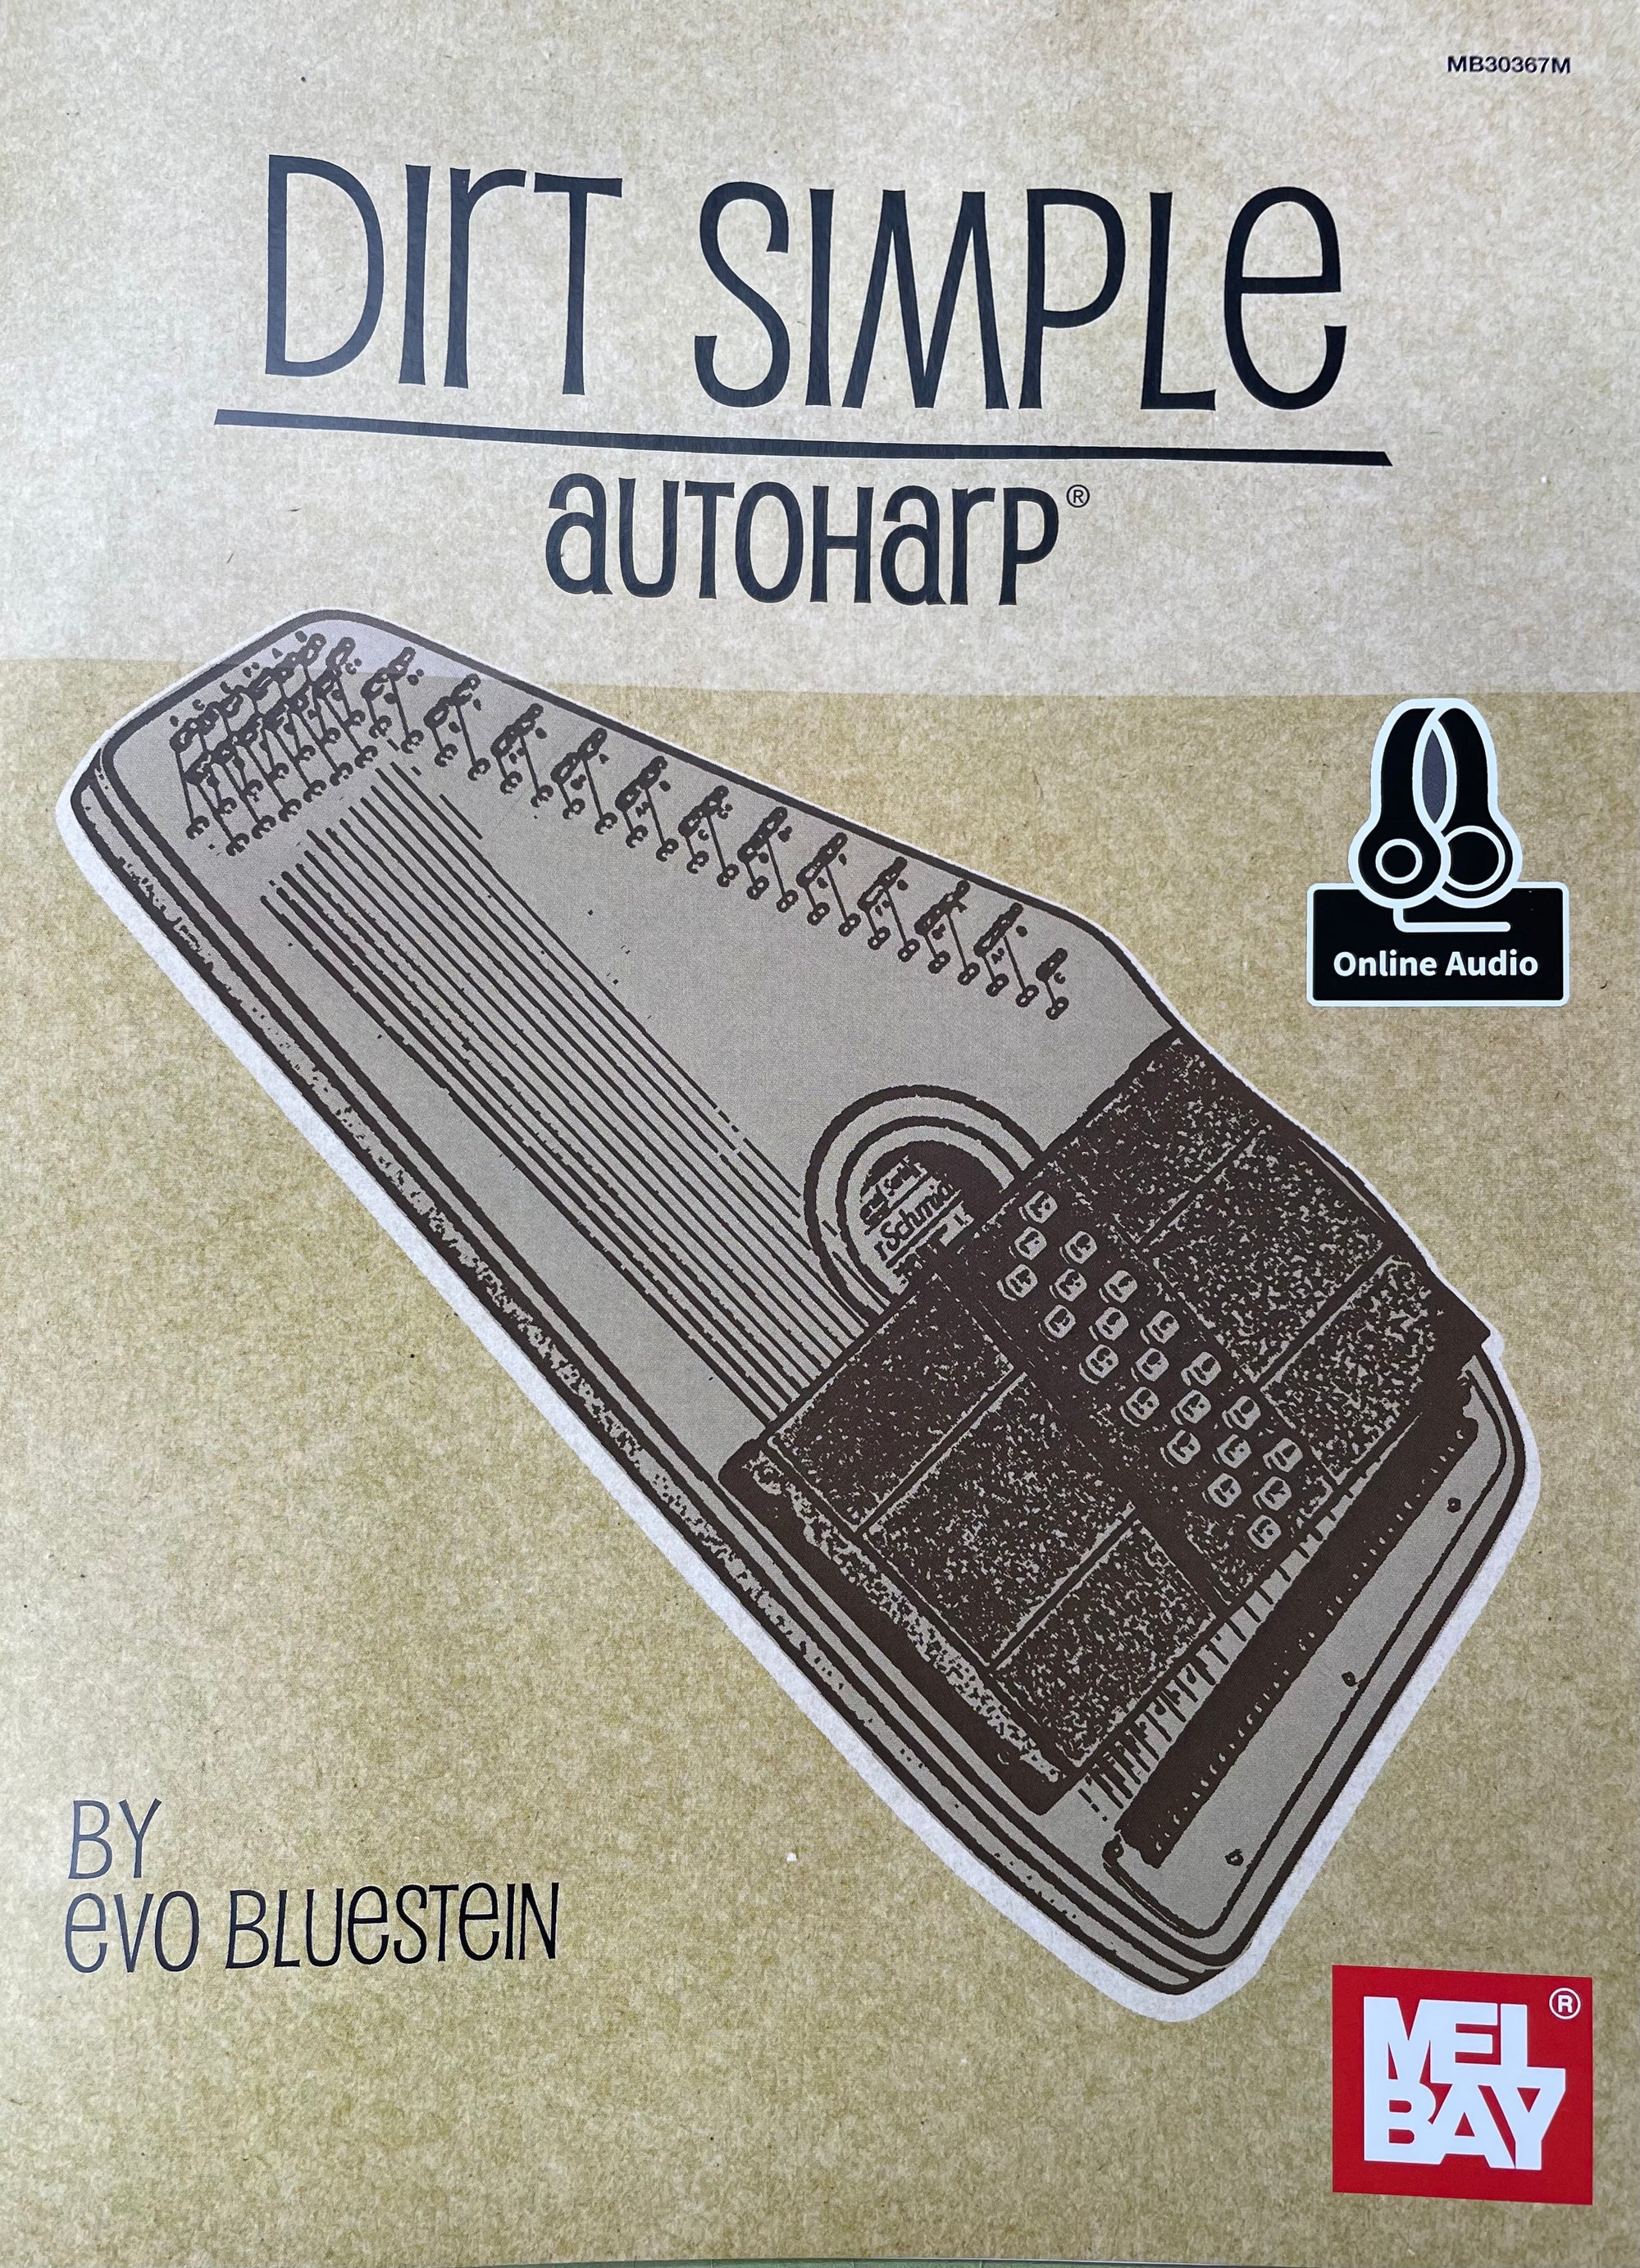 A book cover titled "Dirt Simple Autoharp by Evo Bluestein," featuring an illustration of an autoharp. This instruction book includes simple strumming patterns. Also features an online audio sticker and the Mel Bay logo in the bottom right corner.